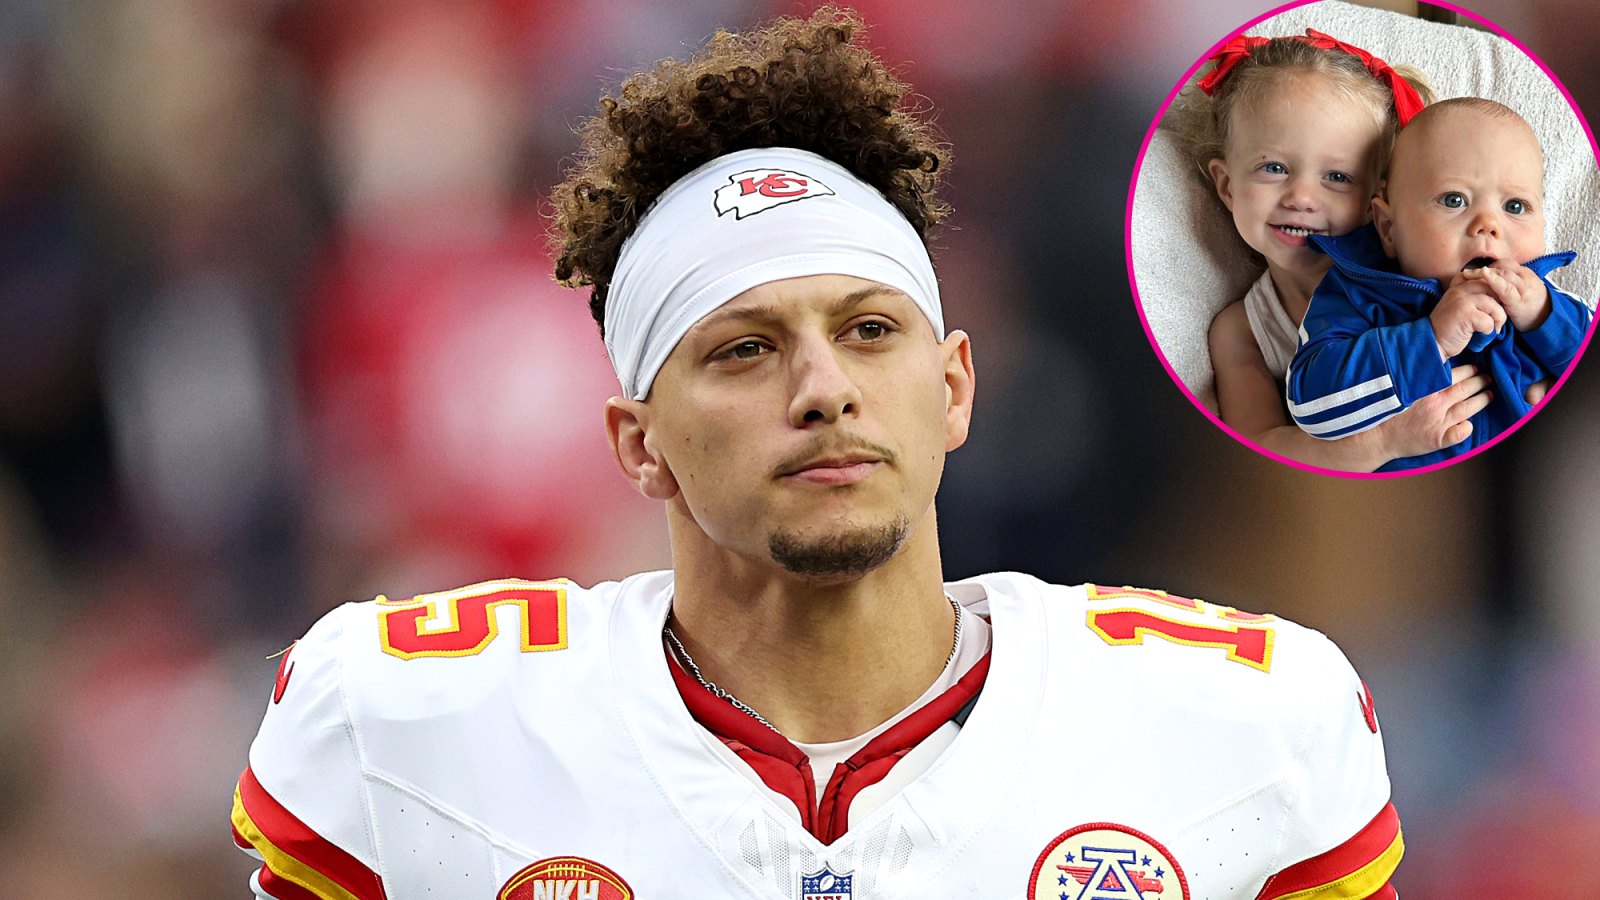 Patrick Mahomes Reflects on Playing on Christmas Day: ‘I’m Going to Miss Christmas Eve With My Kids’